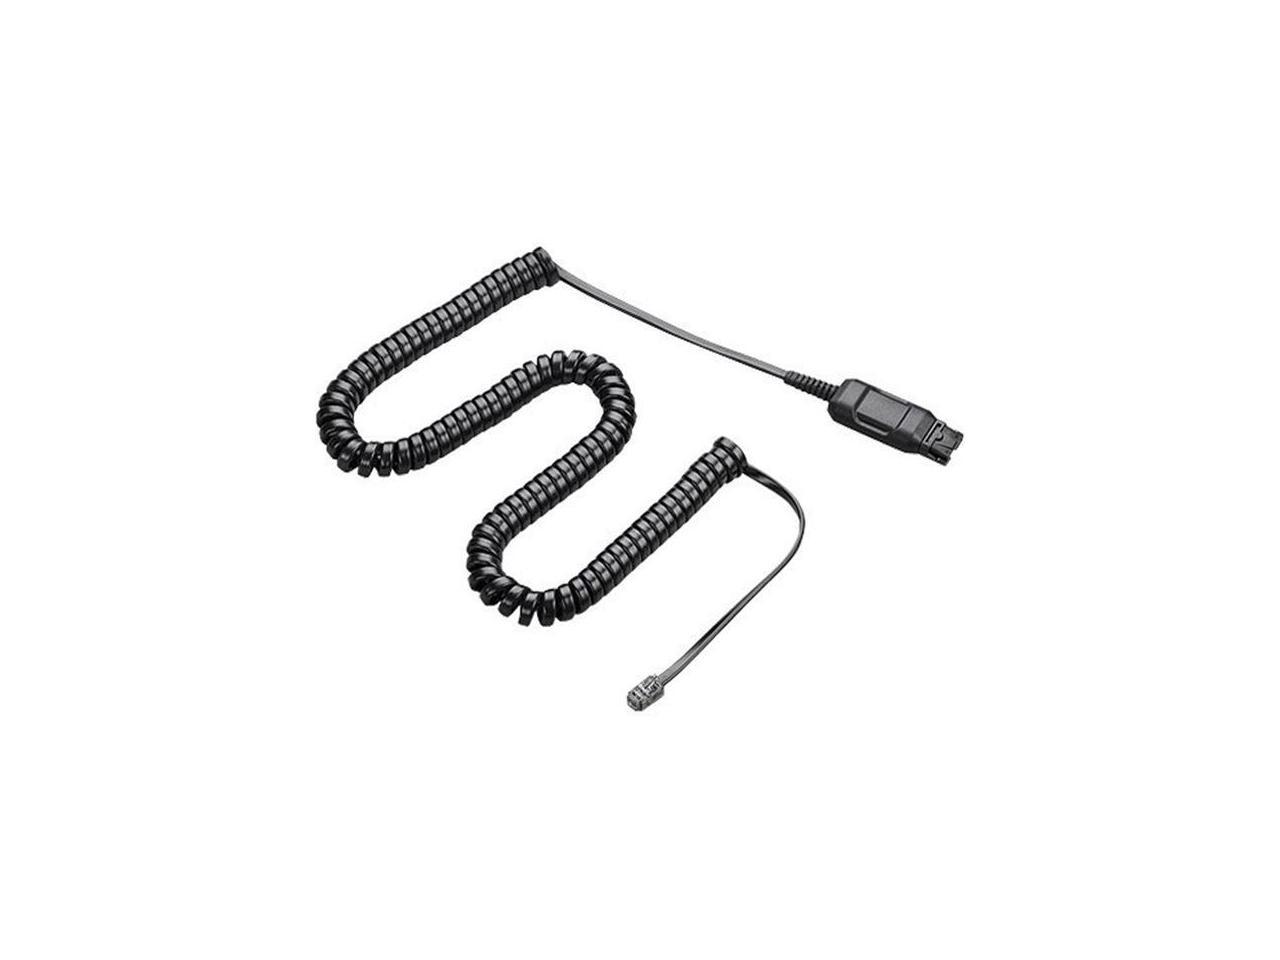 Plantronics Hic Adapter Cable - image 1 of 11